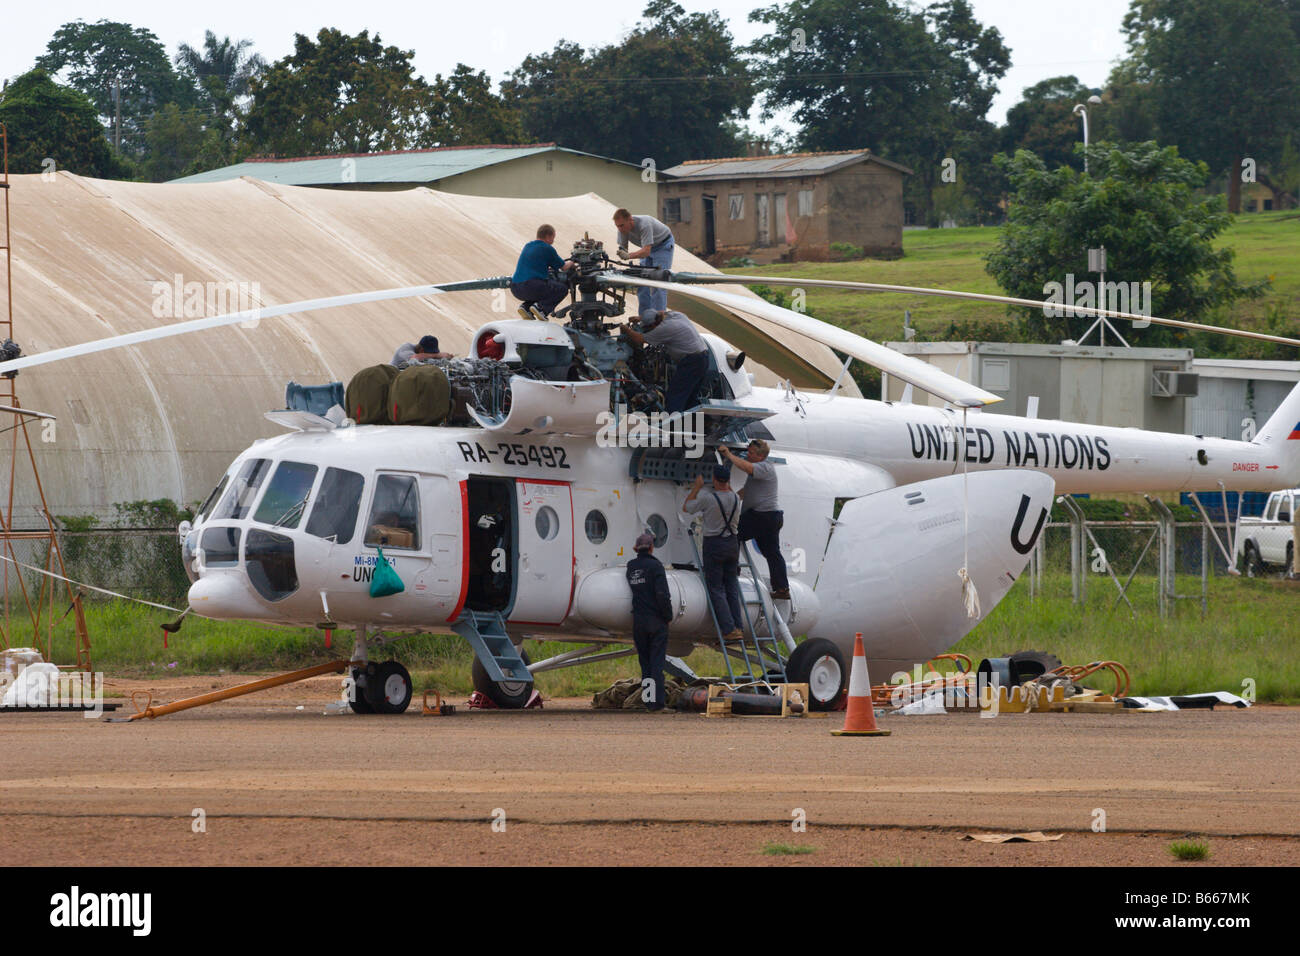 mil-8 mil-17 helicopter UN united nations aircraft Stock Photo